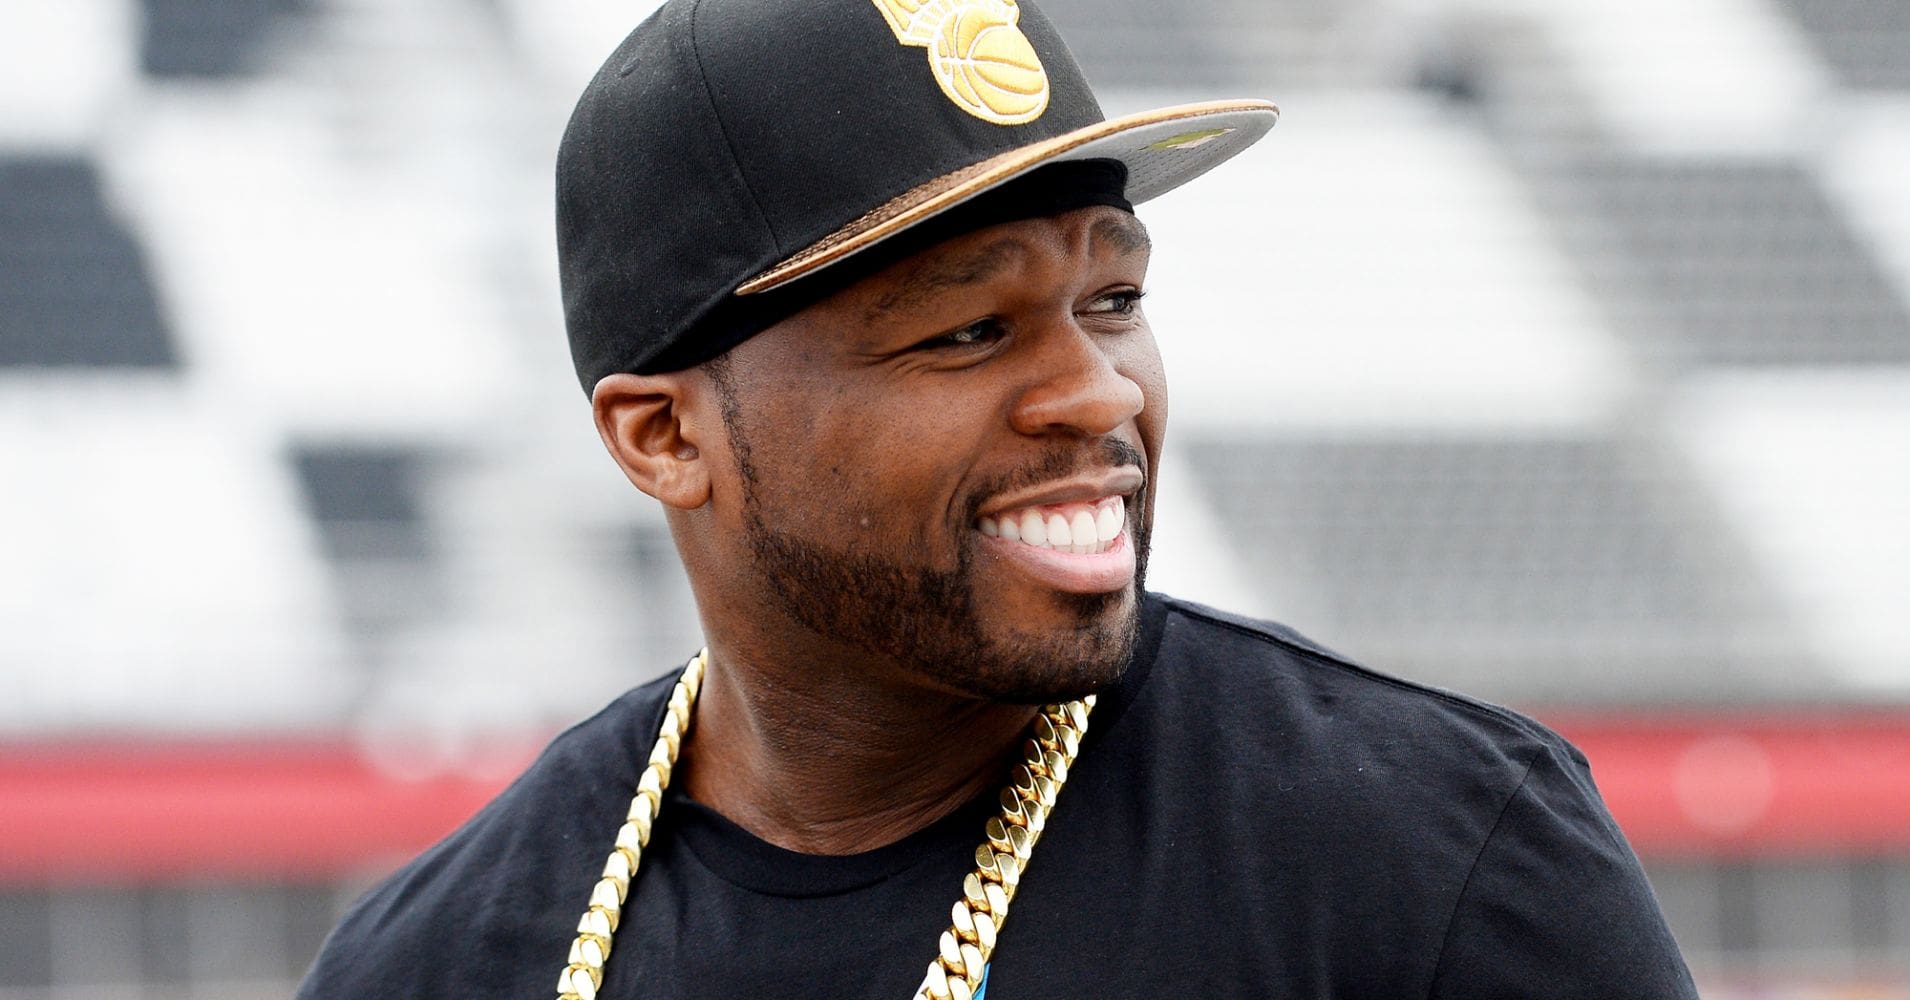 50 Cent Is Back With The Shade - This Time He Slams The Disgraced R. Kelly - Check Out The Video